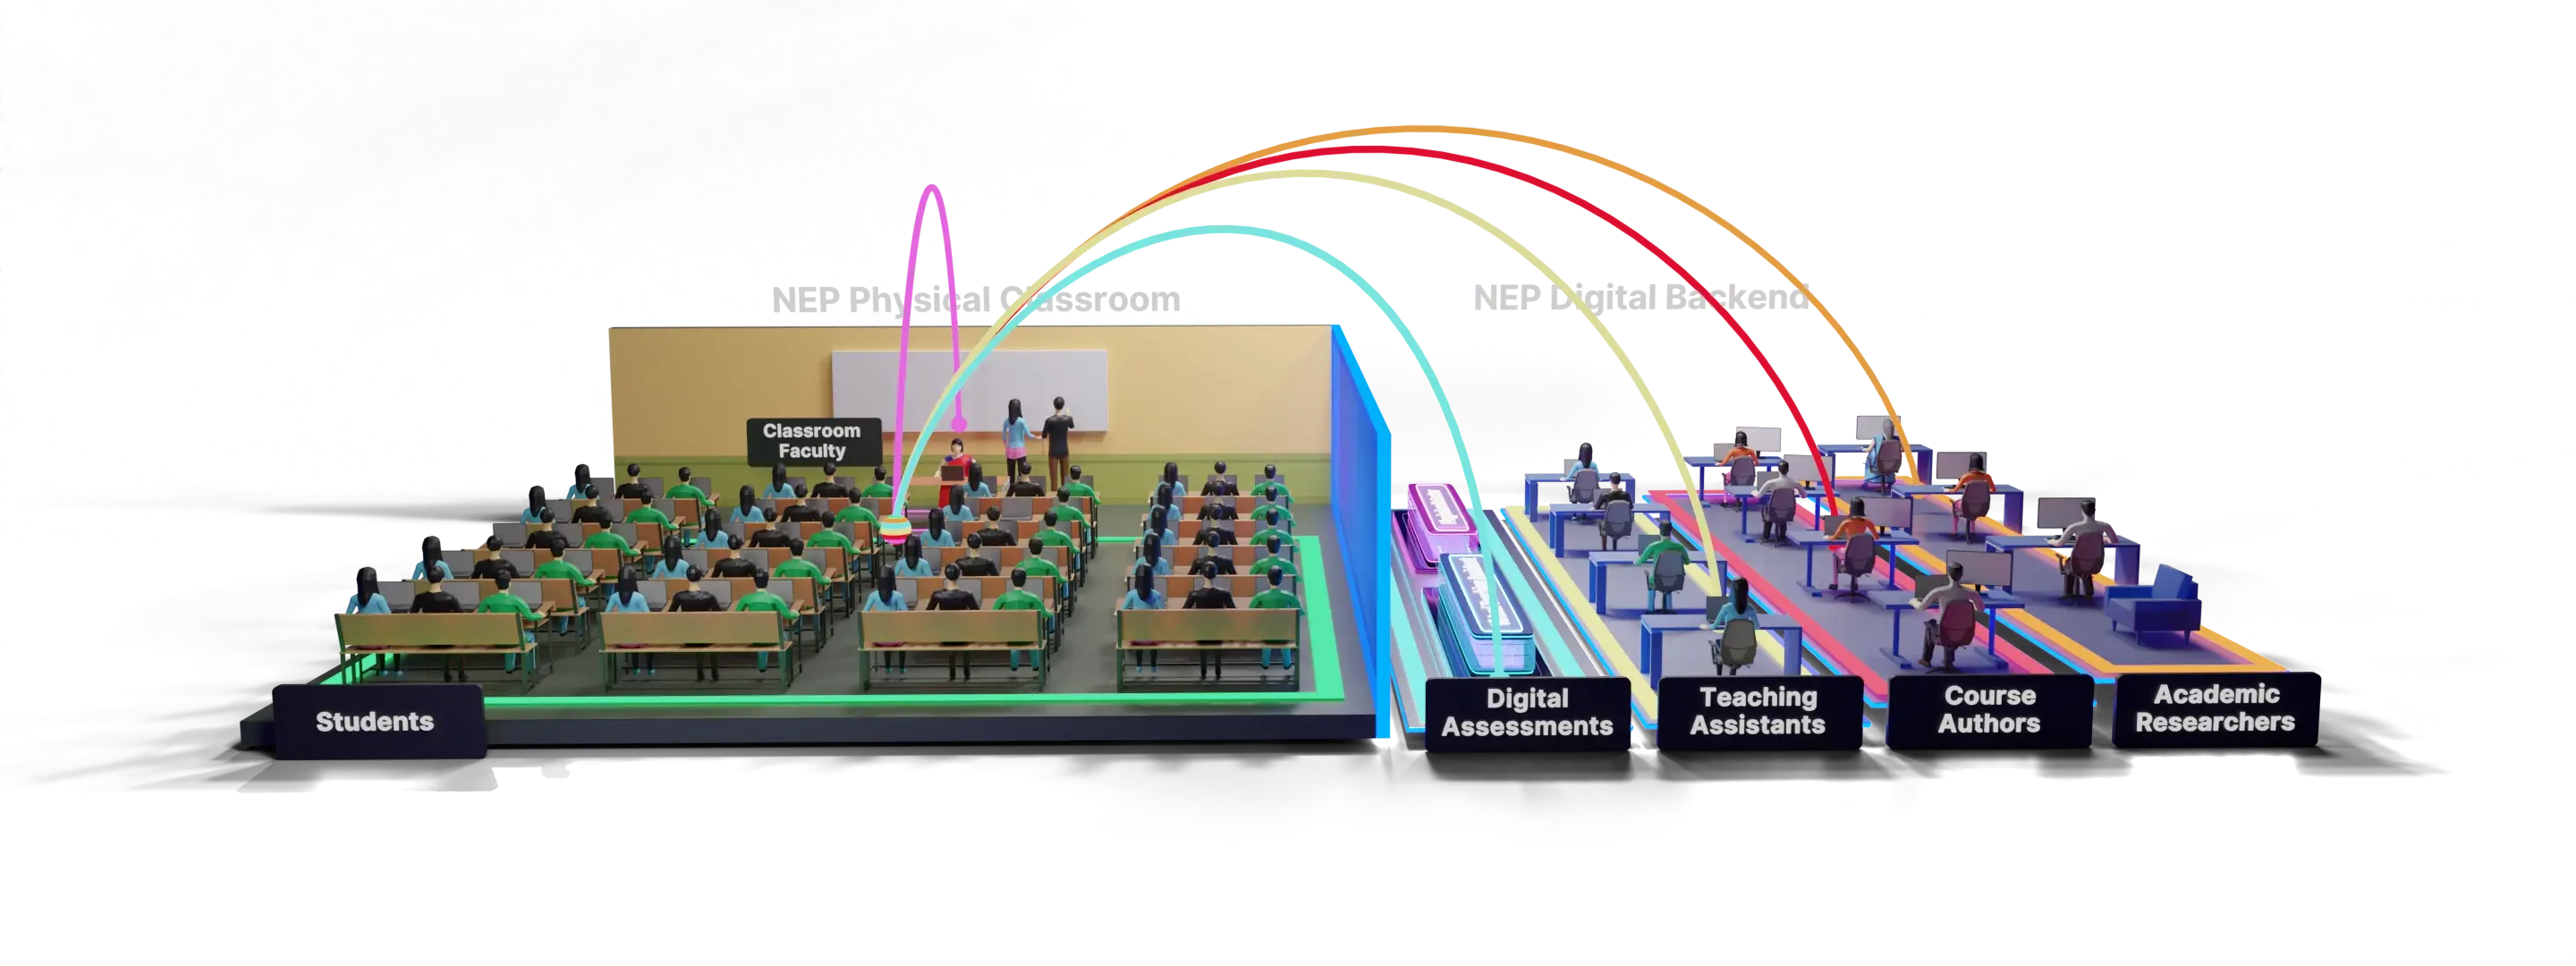 A 3D visualization of a classroom with 60 students, a teacher, and a digital backend. The digital backend has 4 layers: digital assessments, teaching assistants, course authors, and academic researchers. The layers are connected to the classroom with curved lines.